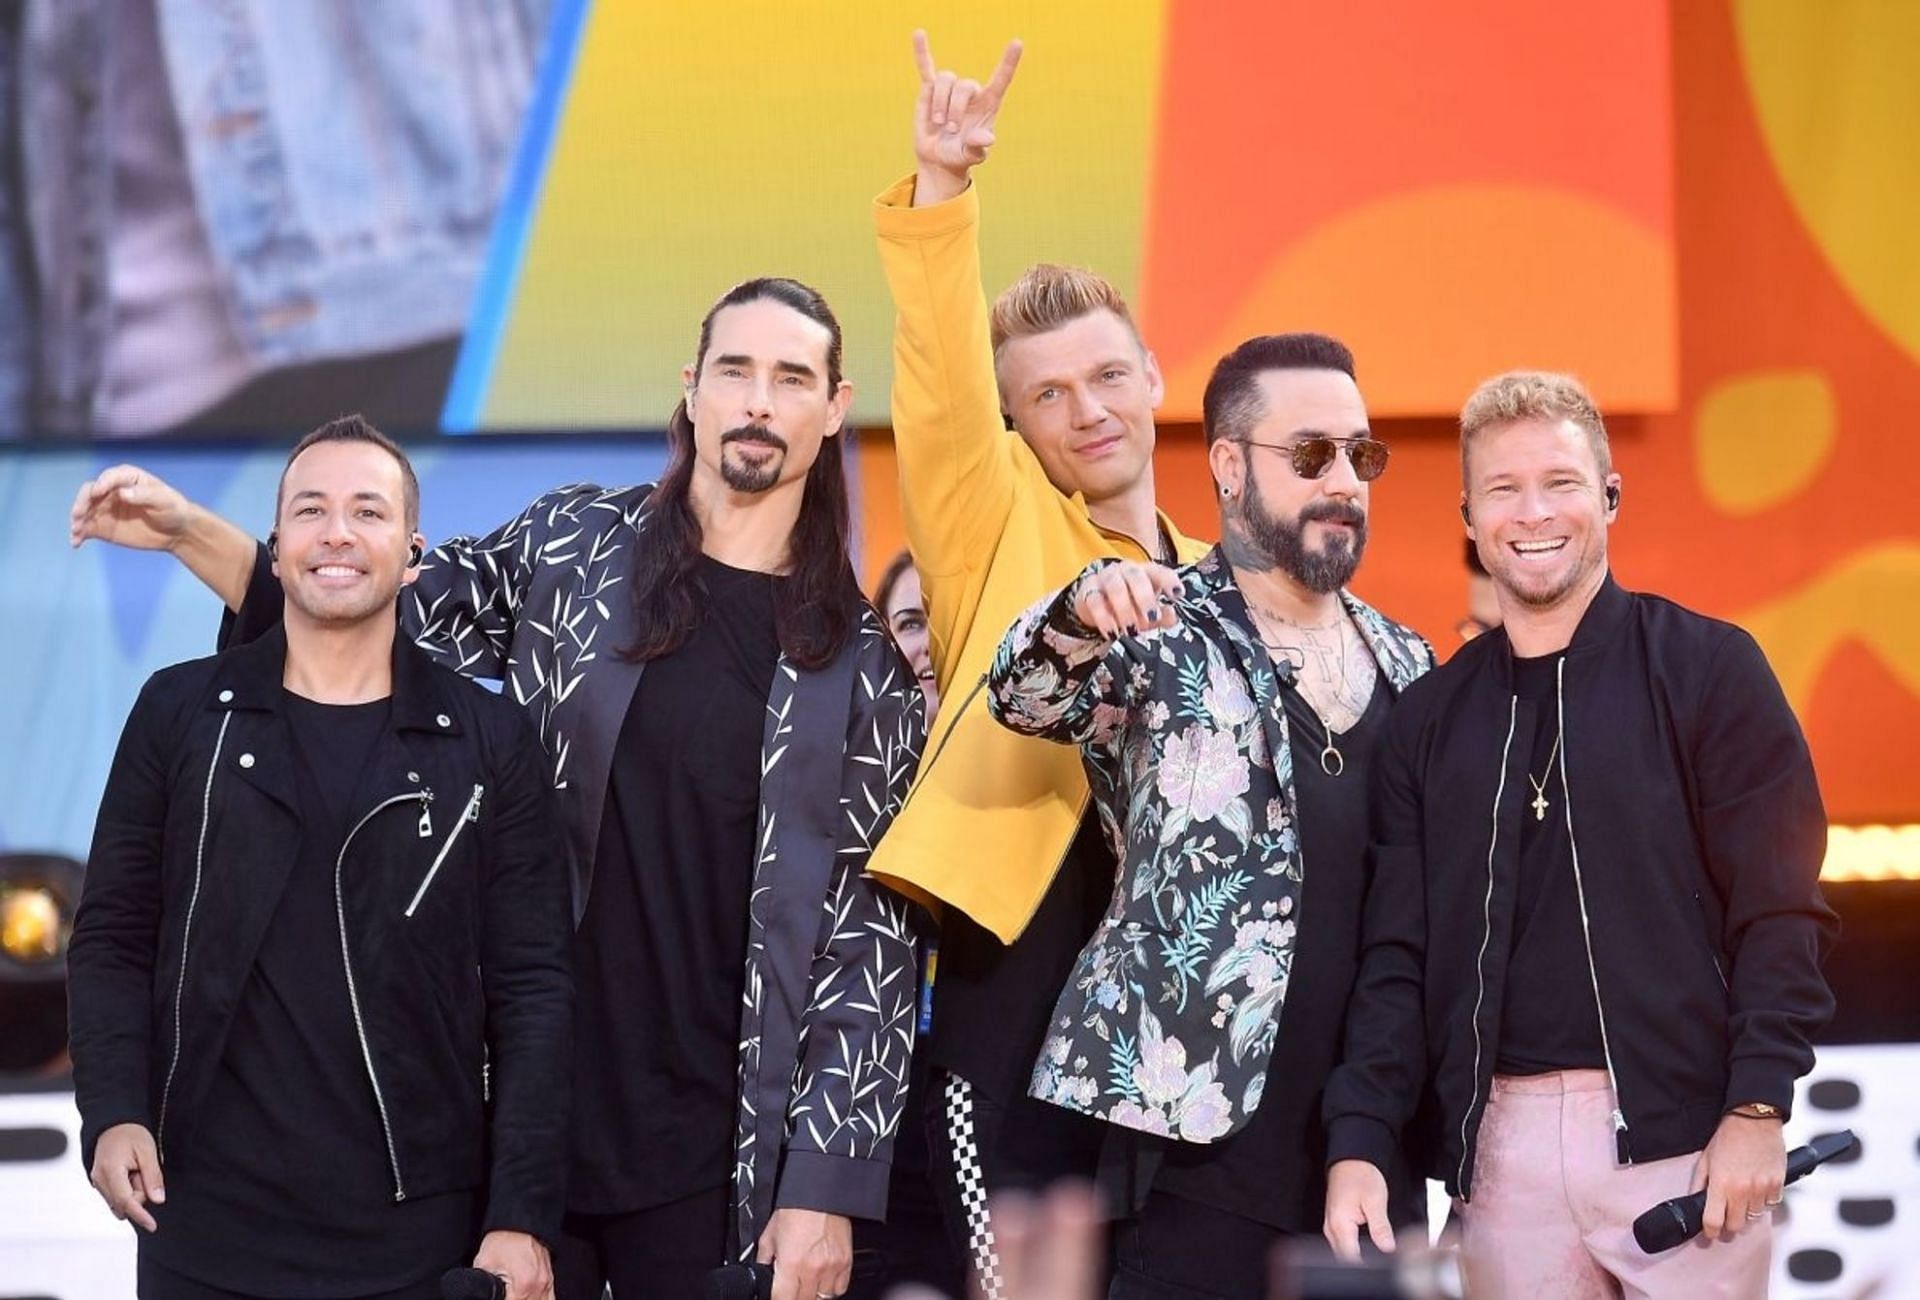 The Backstreet Boys will be one of the headliners at the Summerfest 2022 (Image via Michael Loccisano/Getty Images)